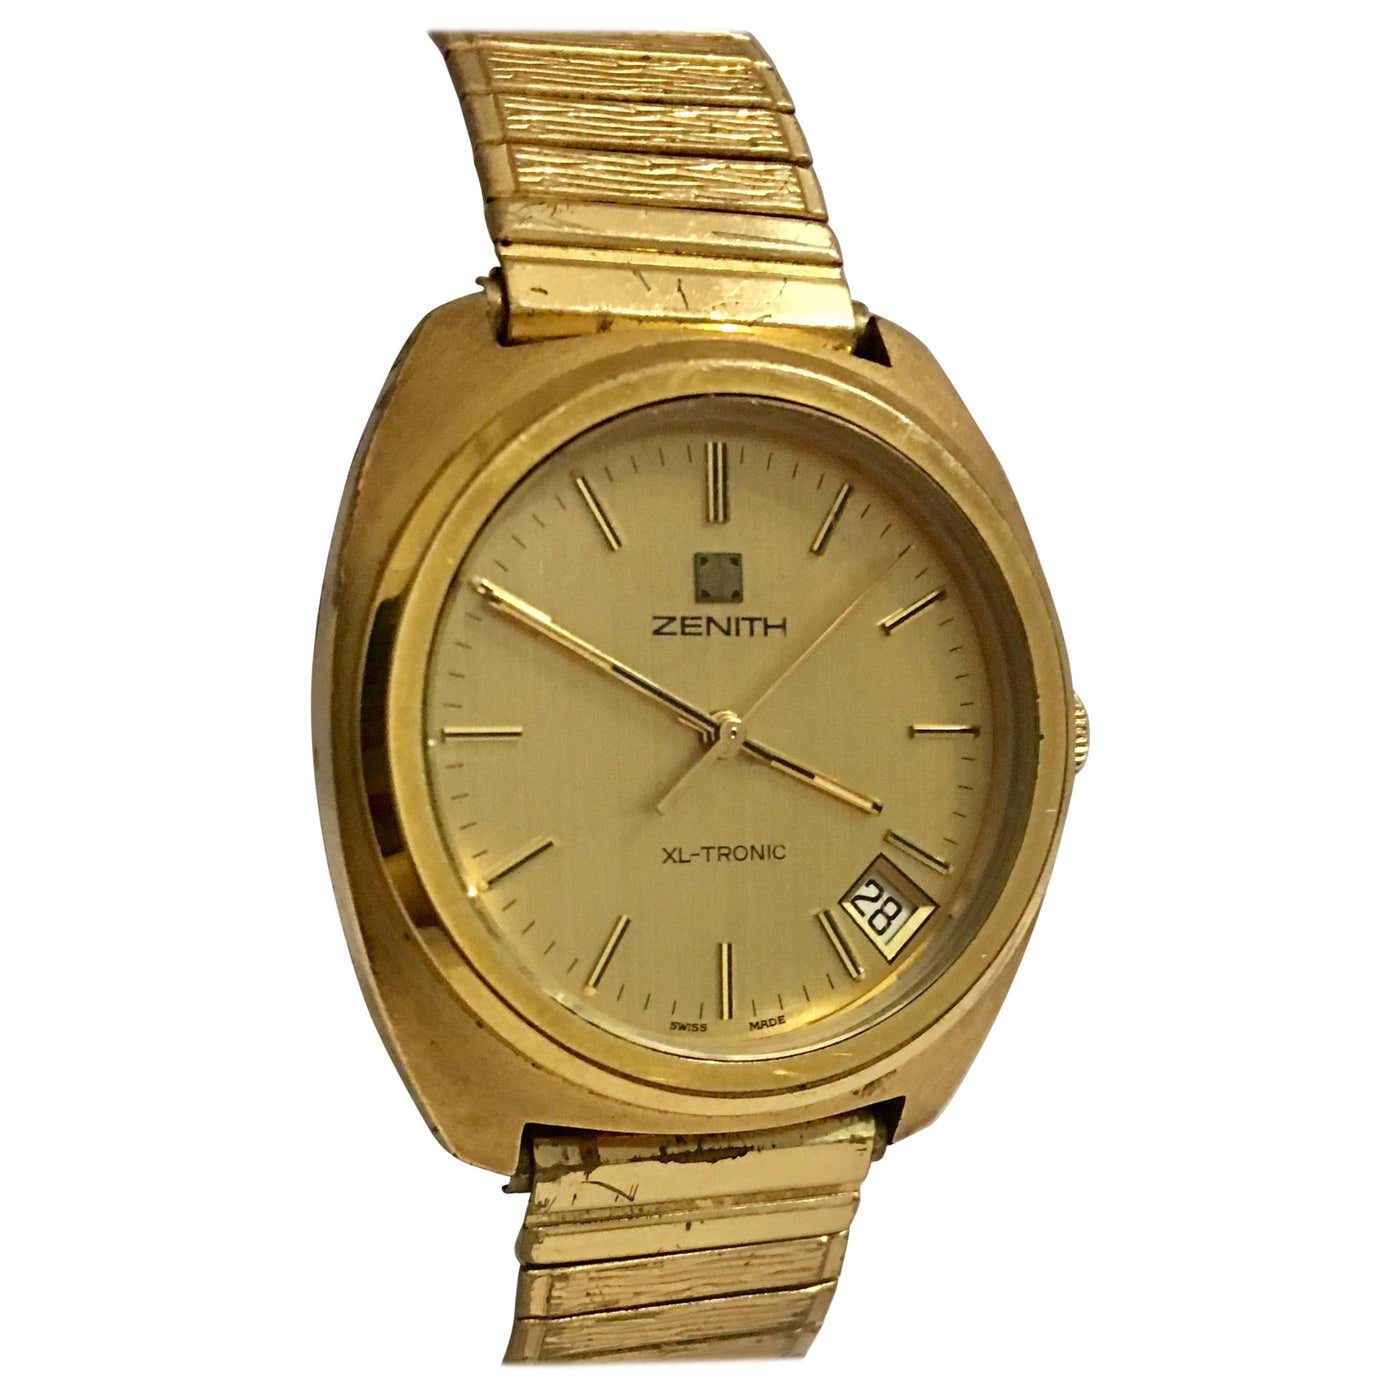 Vintage 1970s Zenith XL-Tronic Gold-Plated/ Stainless Steel Men’s Watch ...